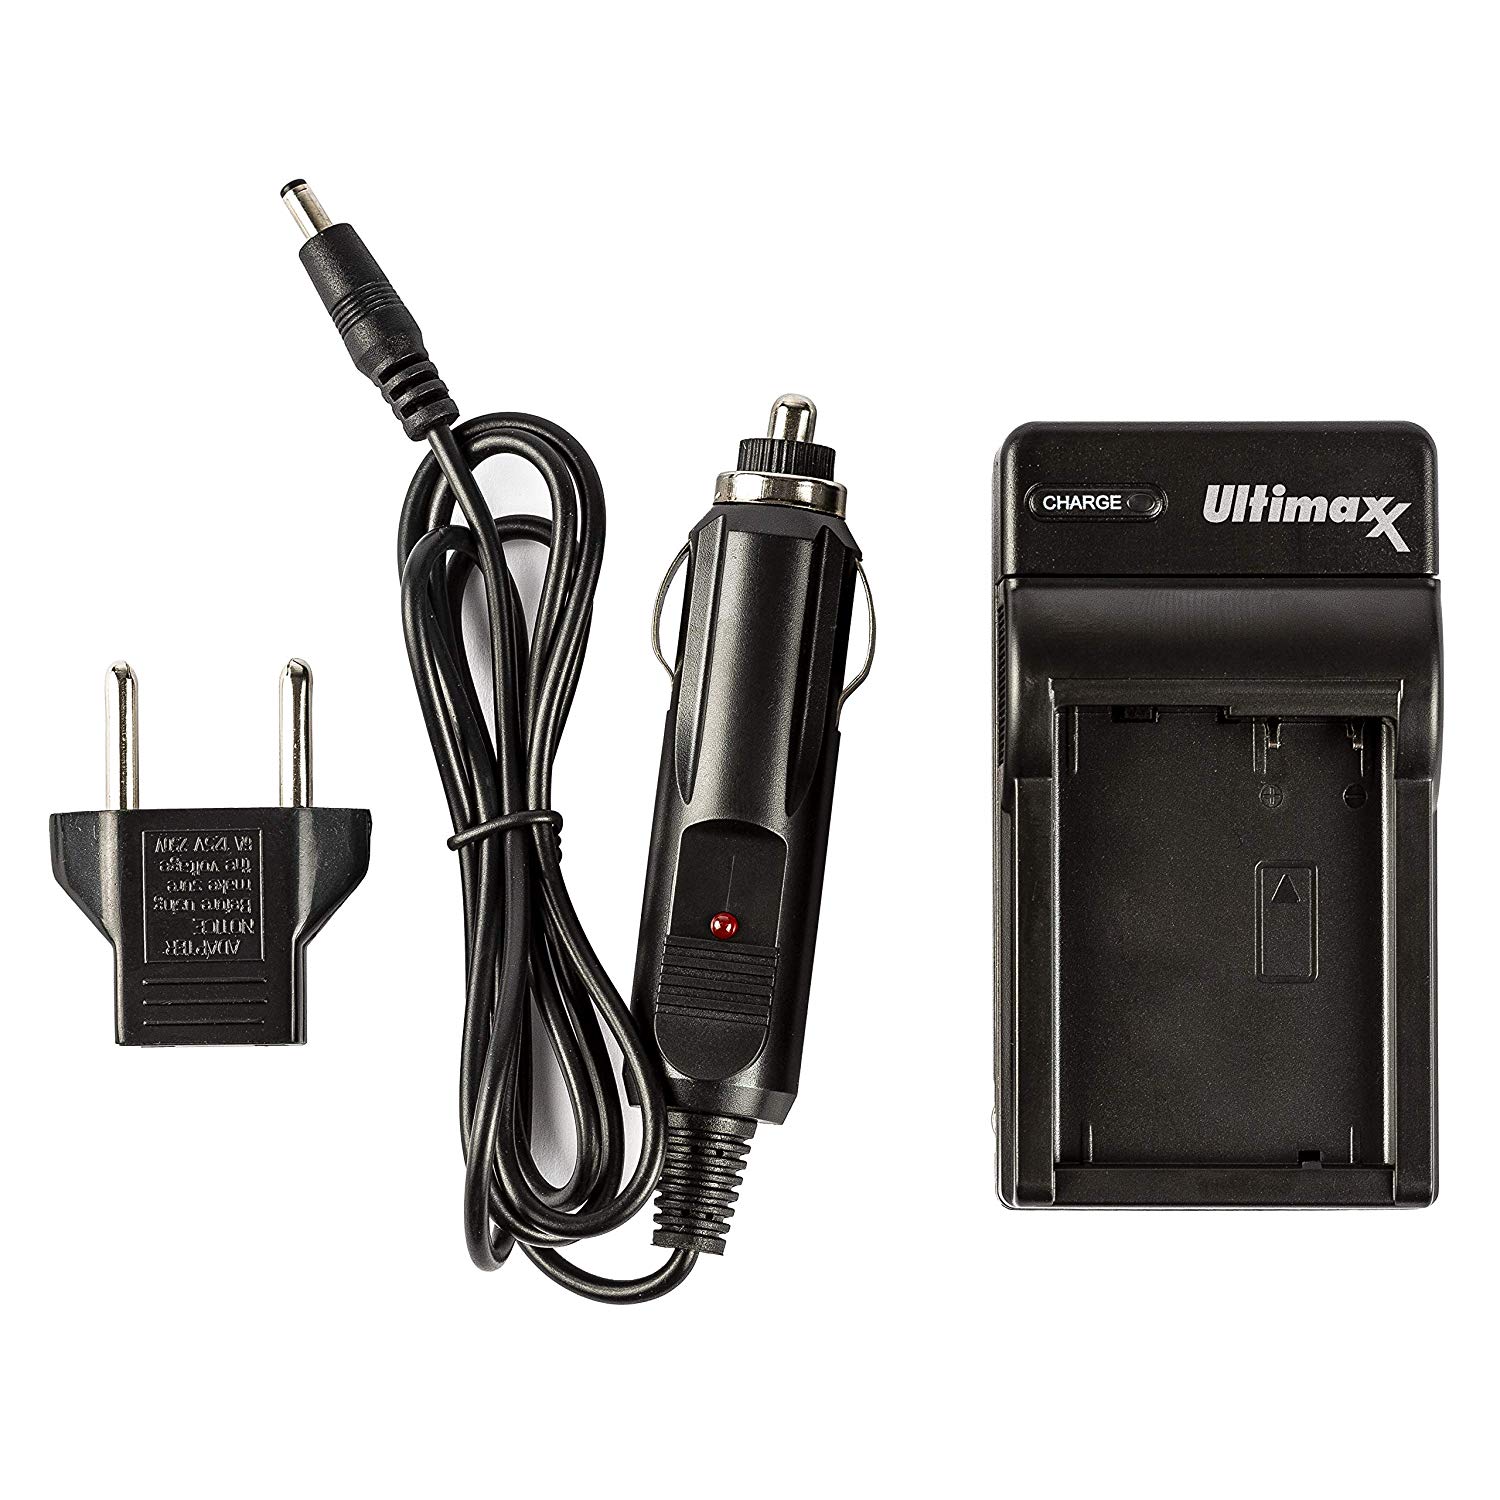 Ultimaxx AC/DC Rapid Home & Travel Charger for DMW-BLE9 / DMW-BLG10 Batteries